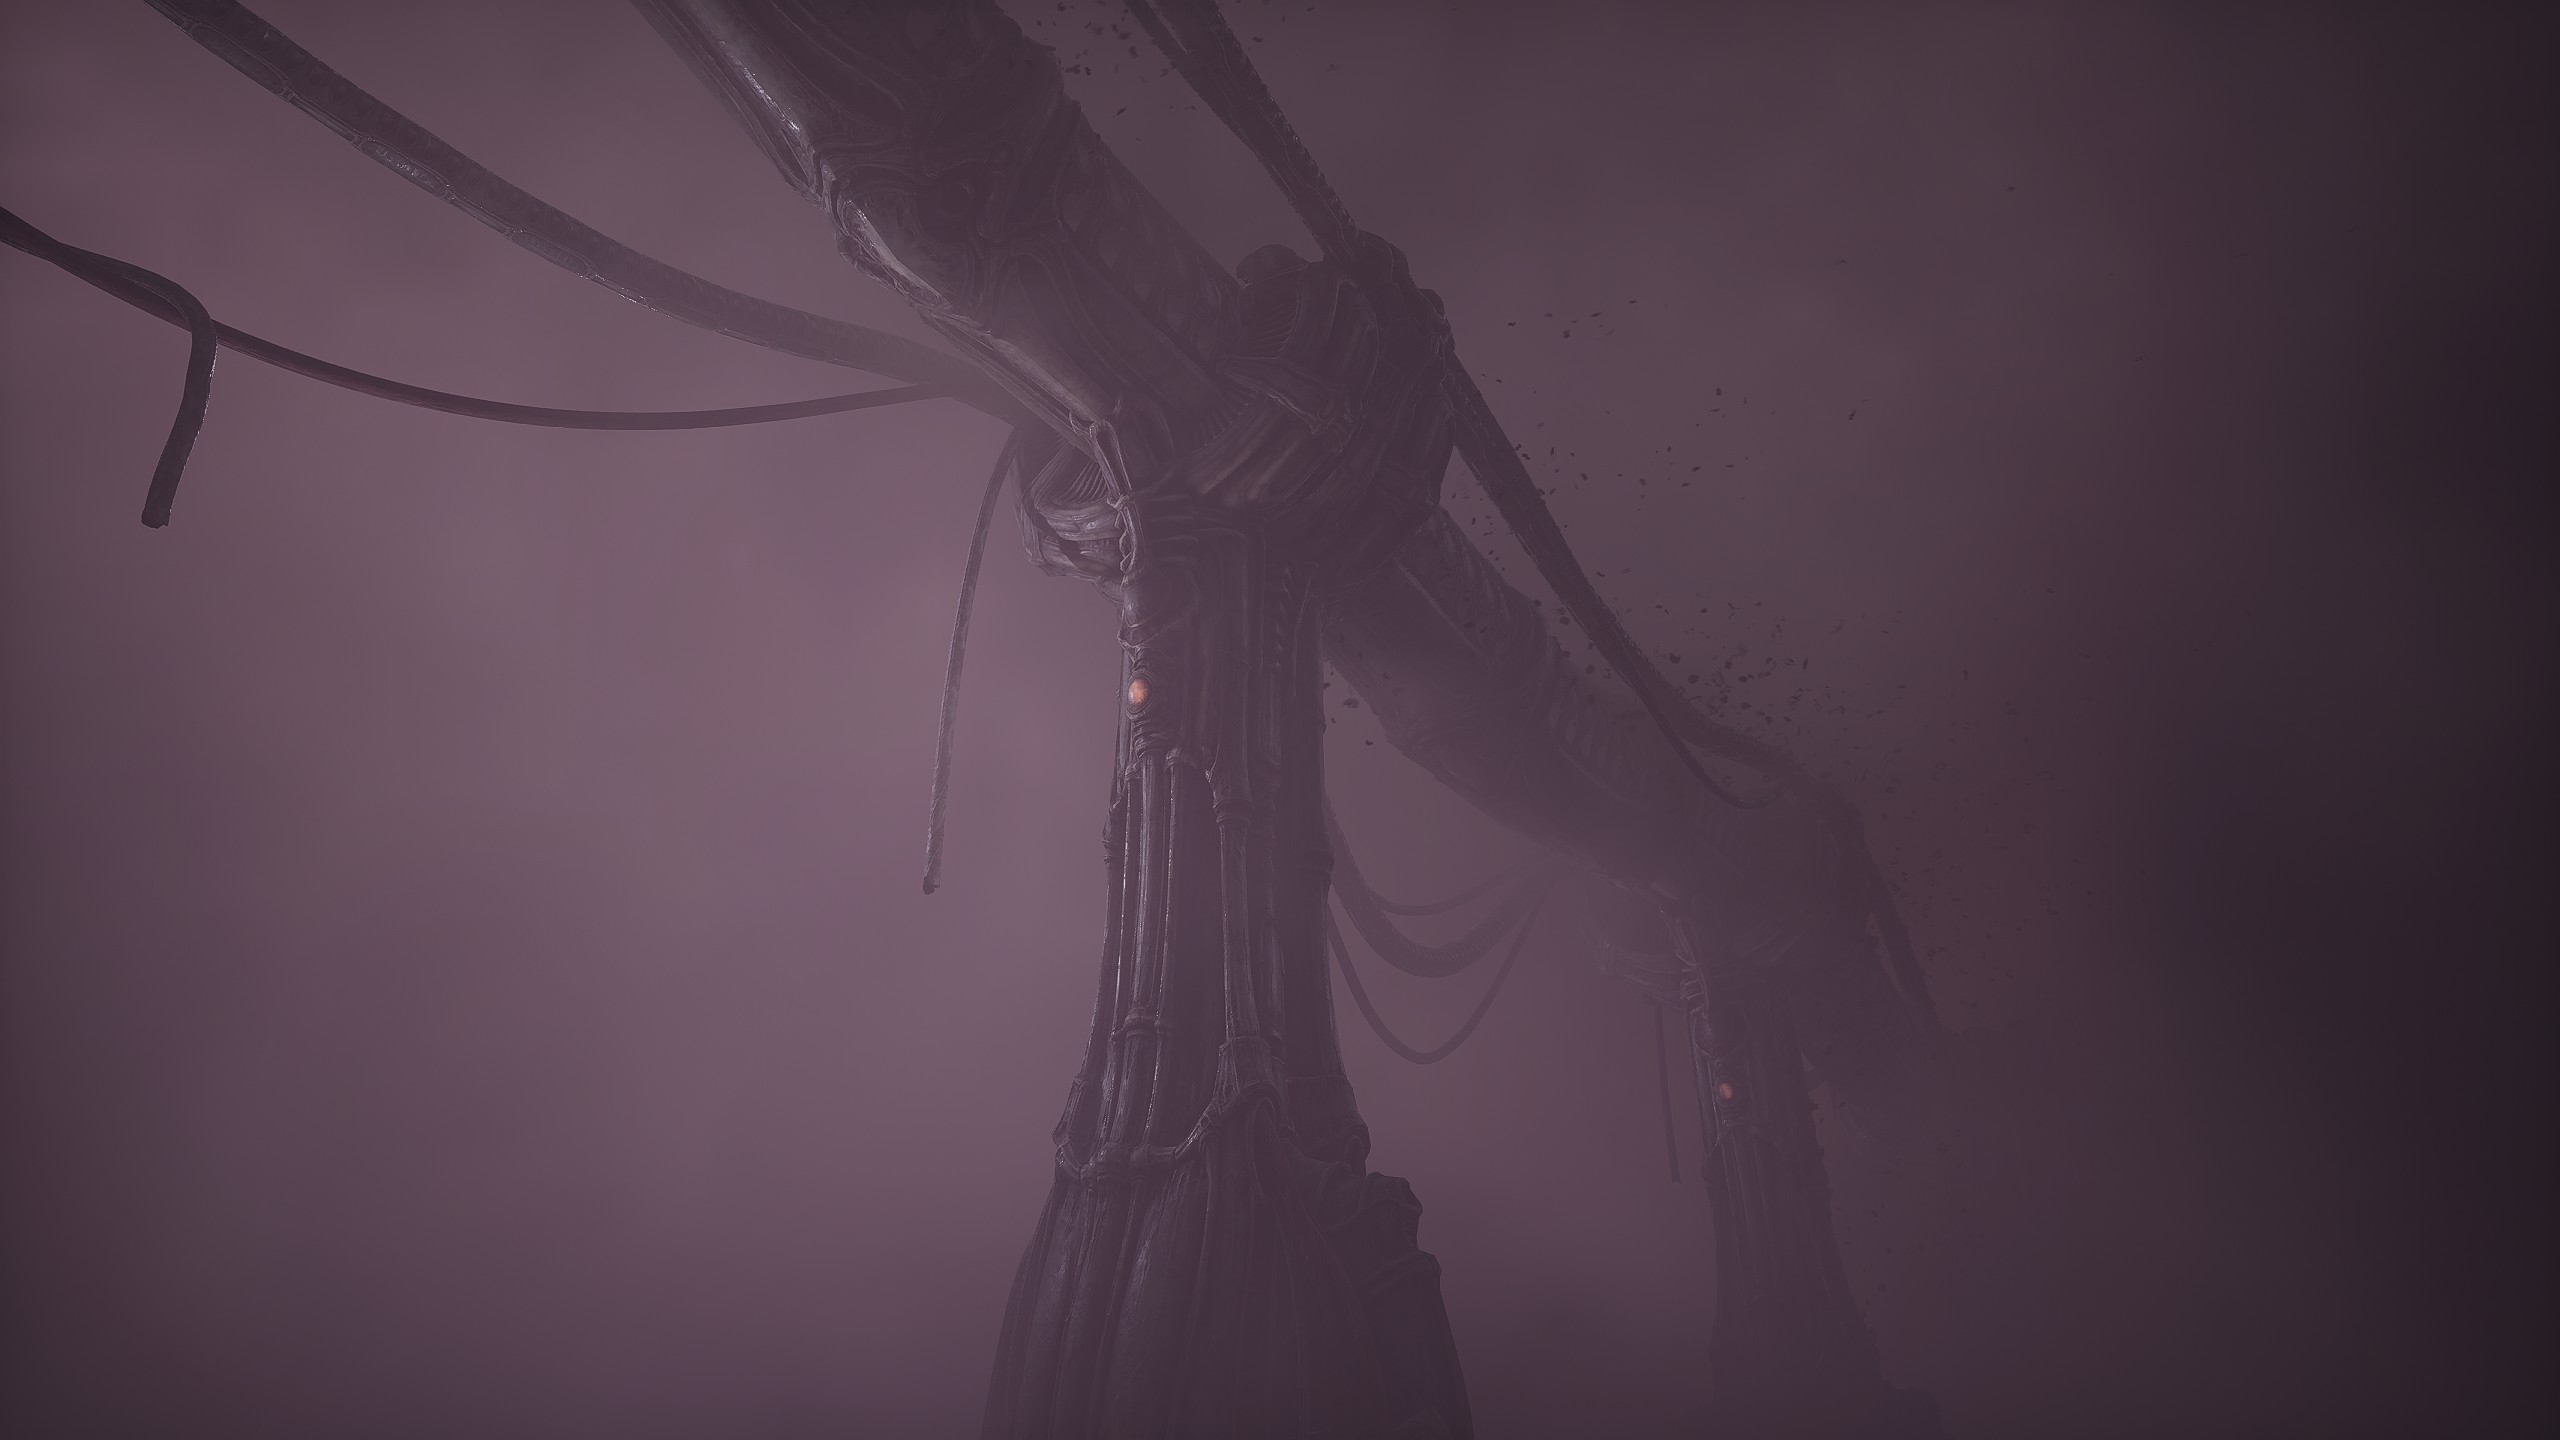 insectoid columns holding up some kind of suspension bridge barely visible through lilac haze